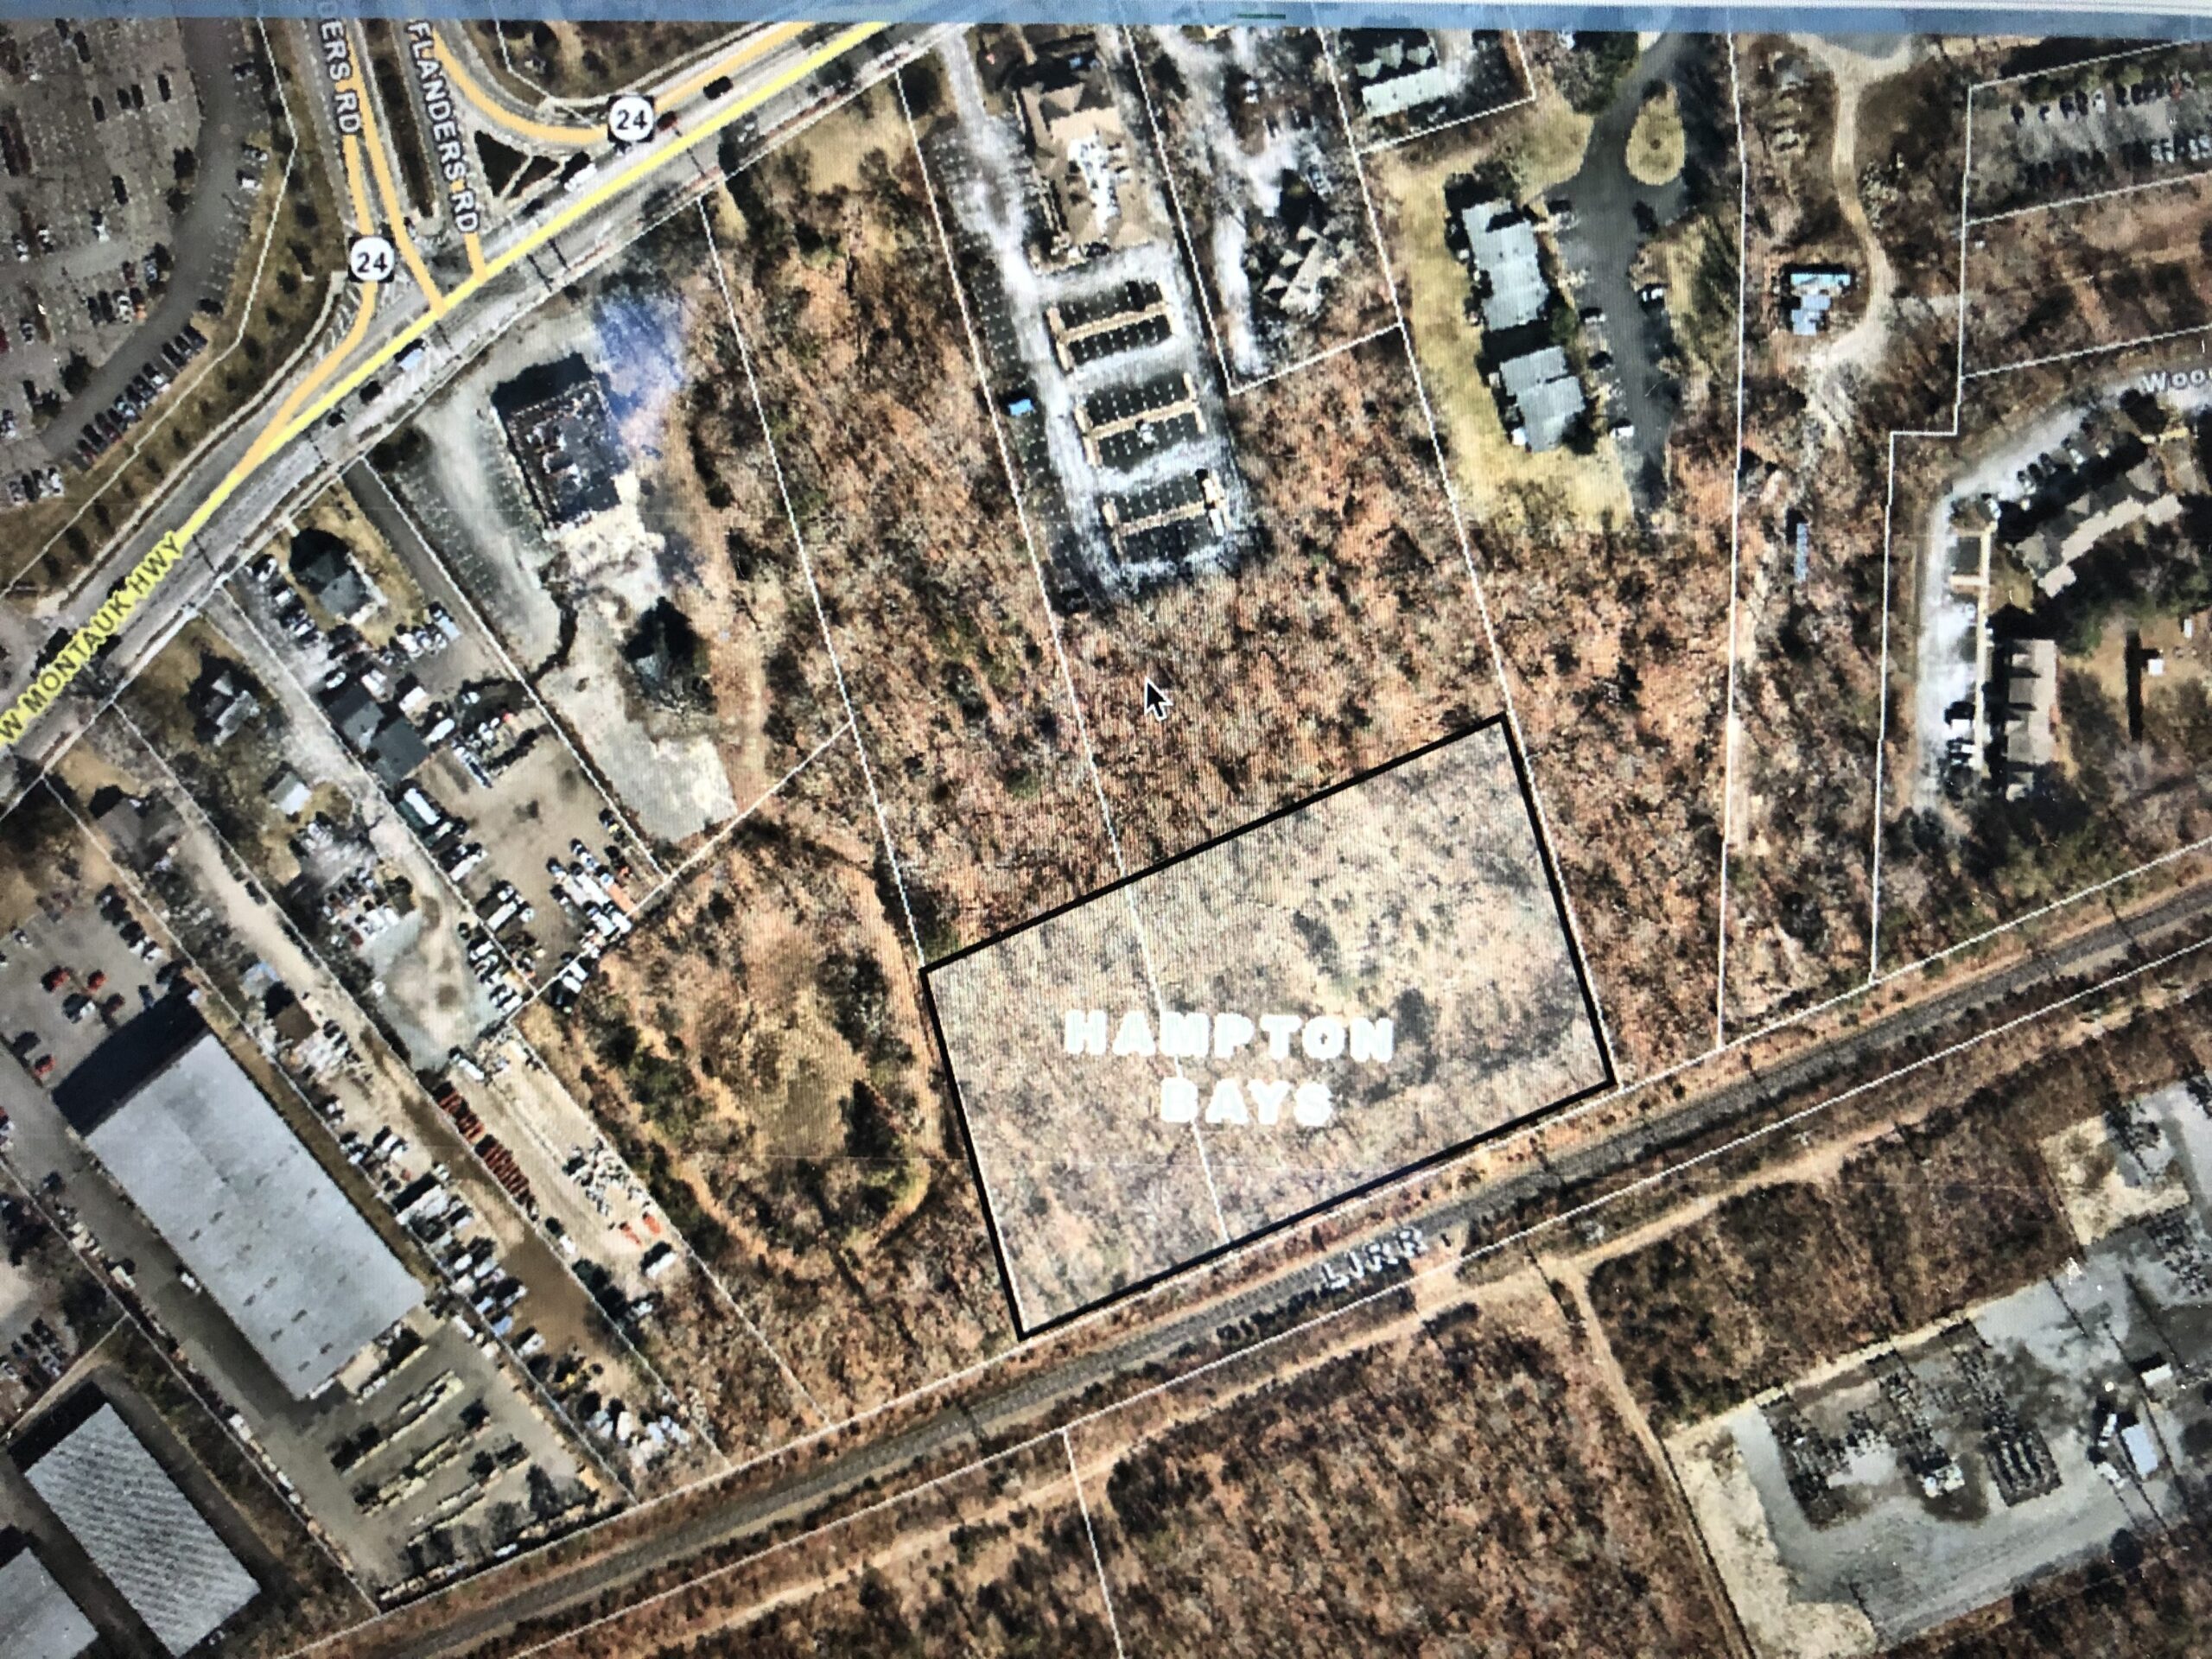 An alternate site for a sewage treatment plant to service downtown Hampton Bays  outlined on a map sent by Supervisor Jay Schneiderman.